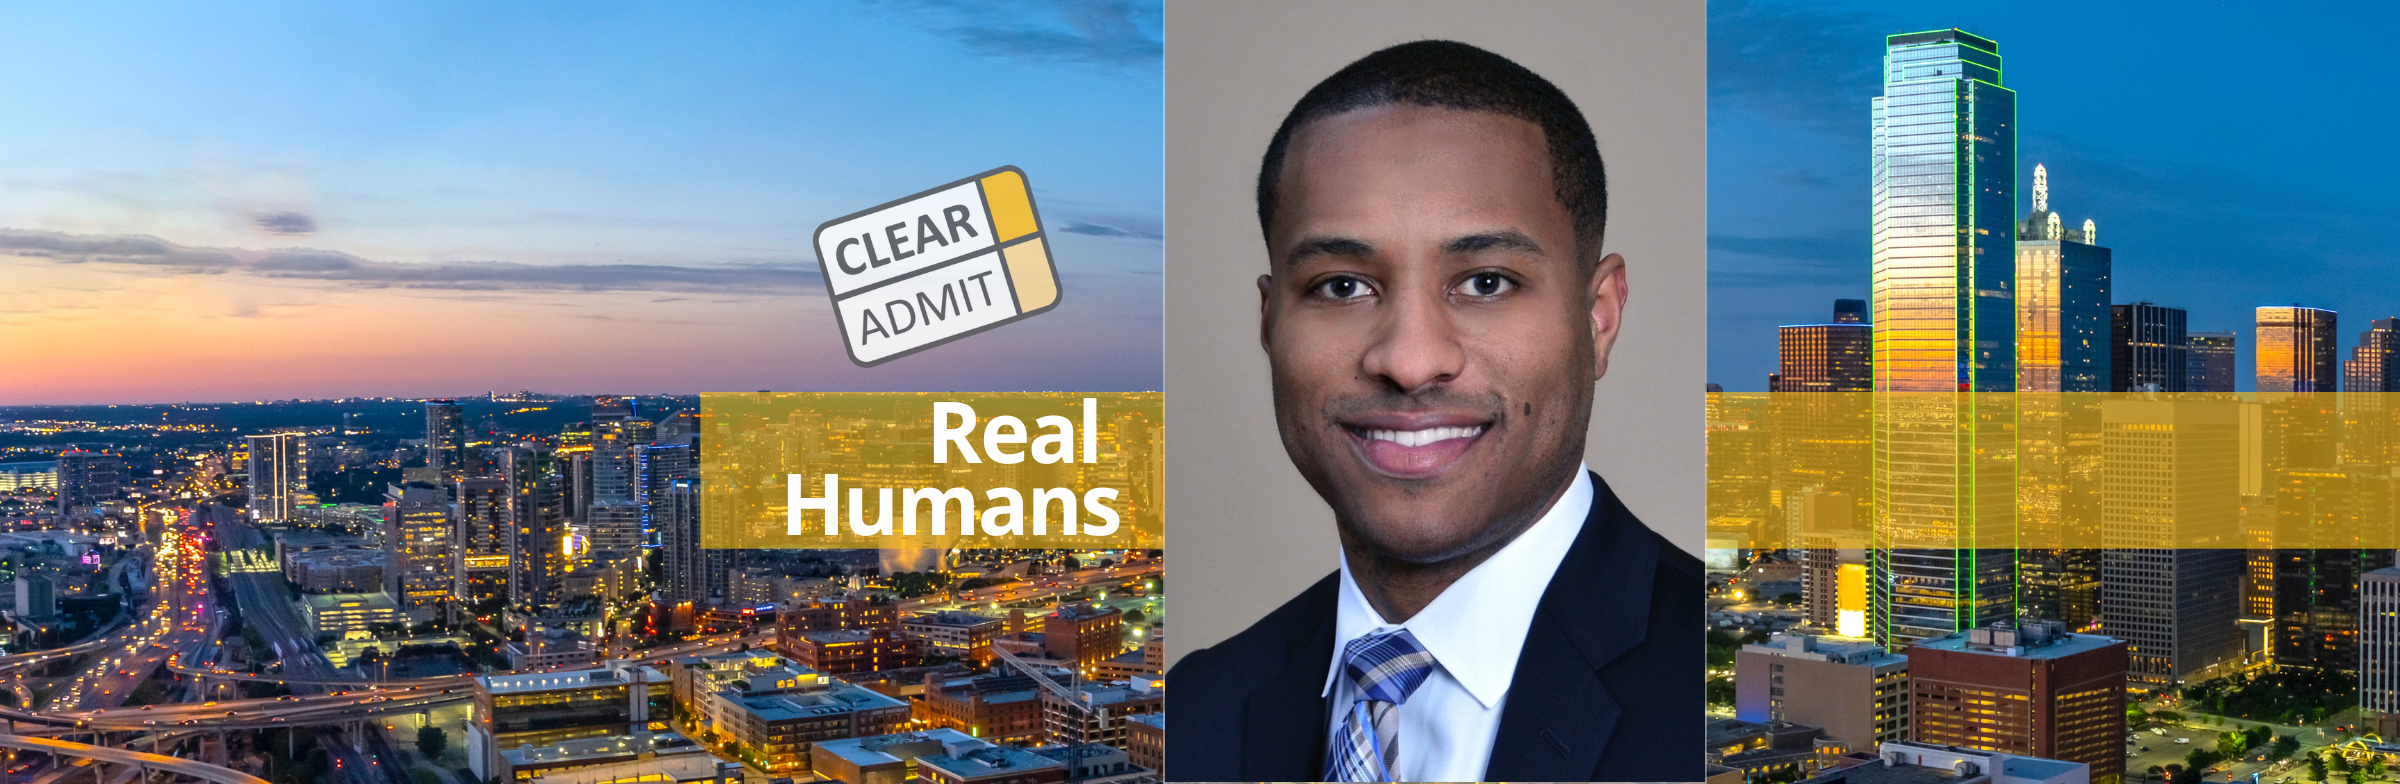 Image for Real Humans of BCG: Damon Reynolds, UT Austin McCombs MBA ’20, Project Leader